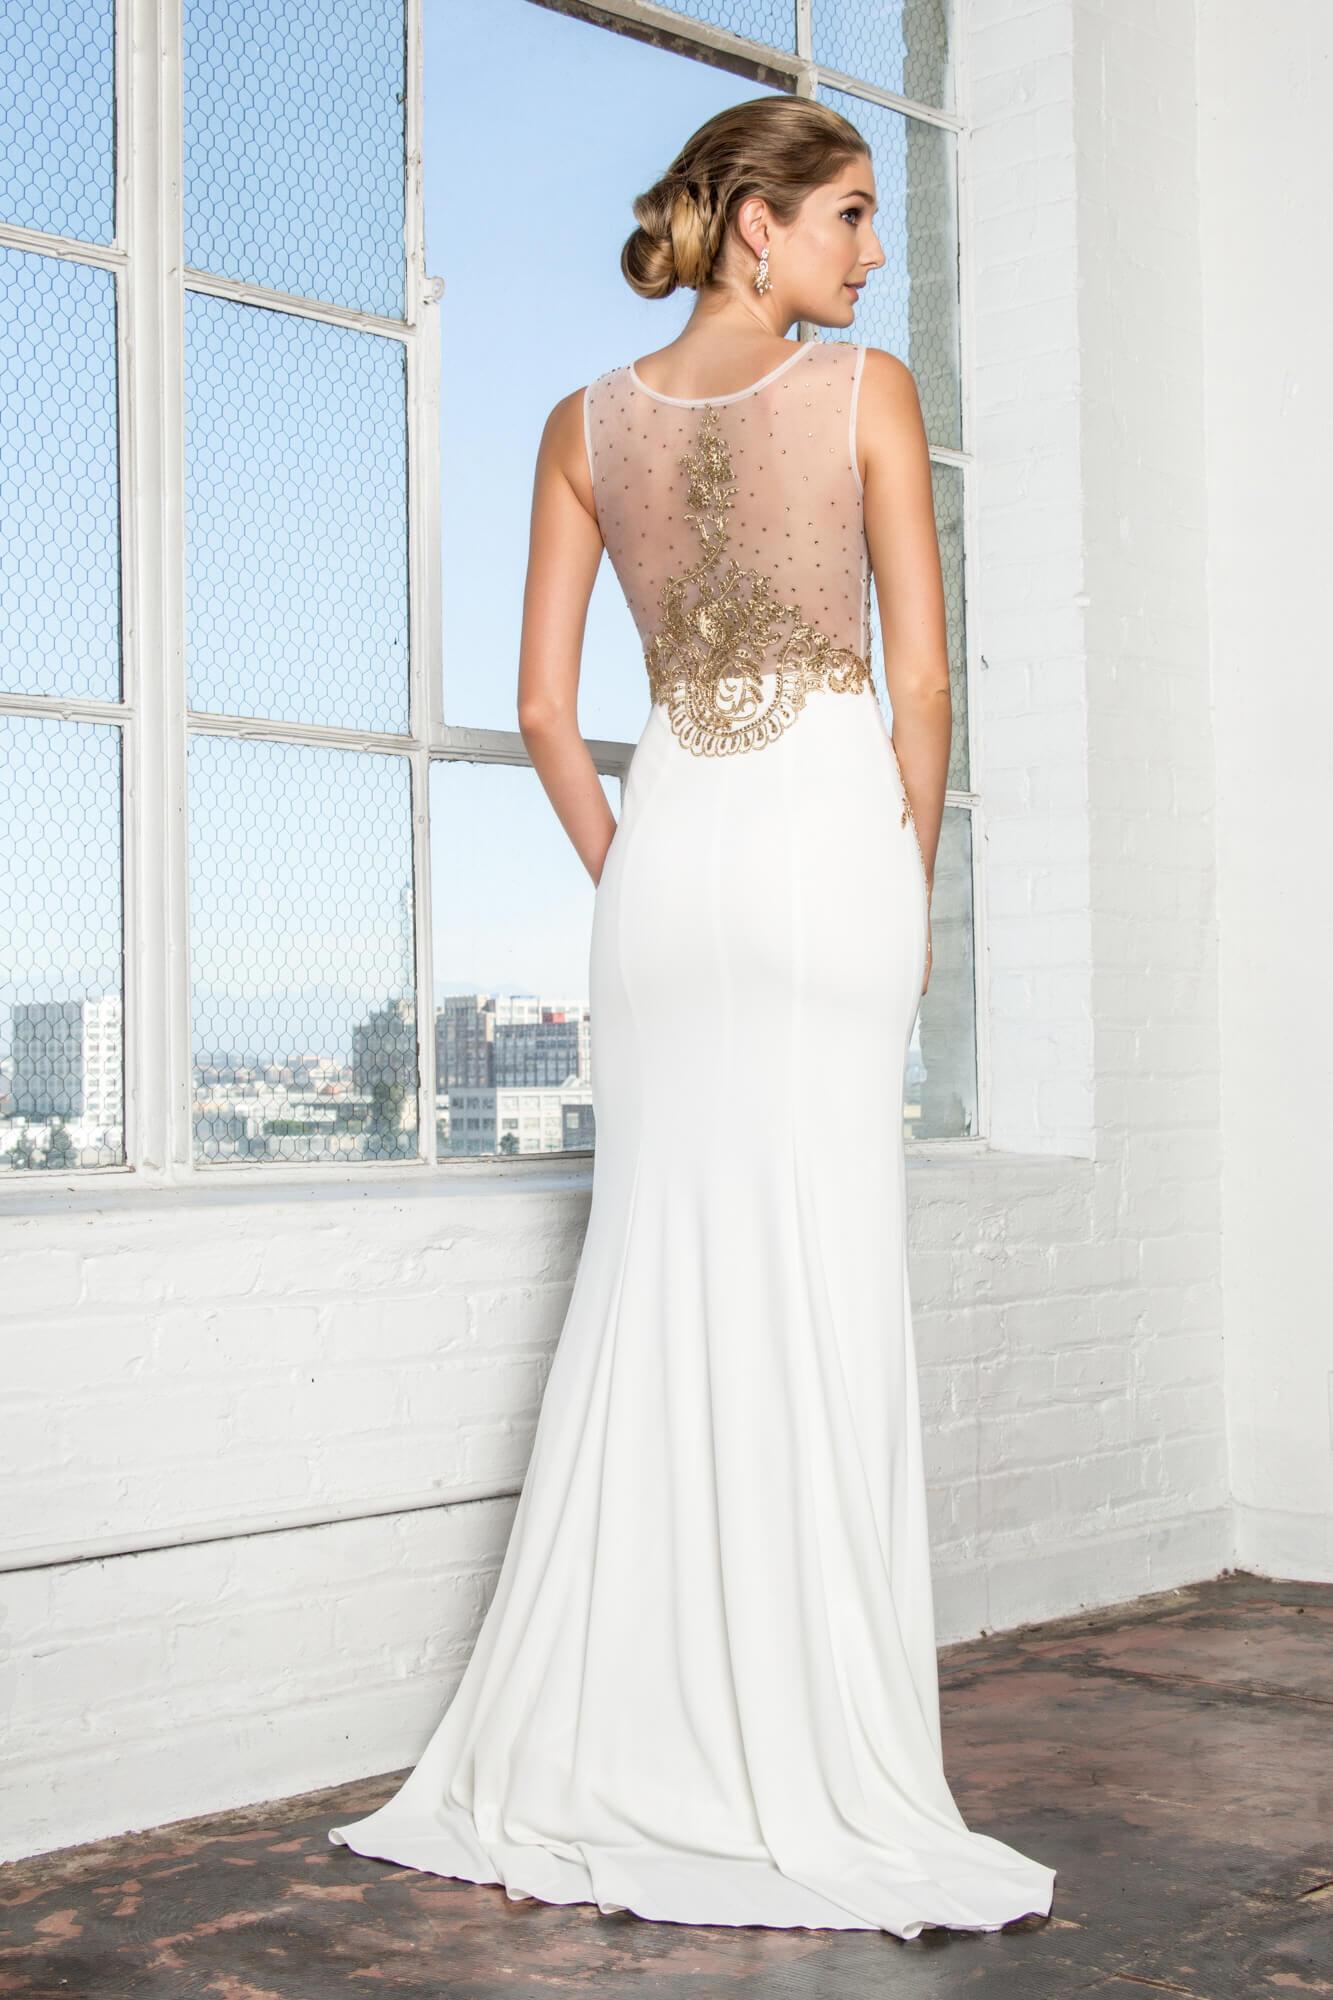 Sleeveless Long Formal Prom Dress Sale - The Dress Outlet